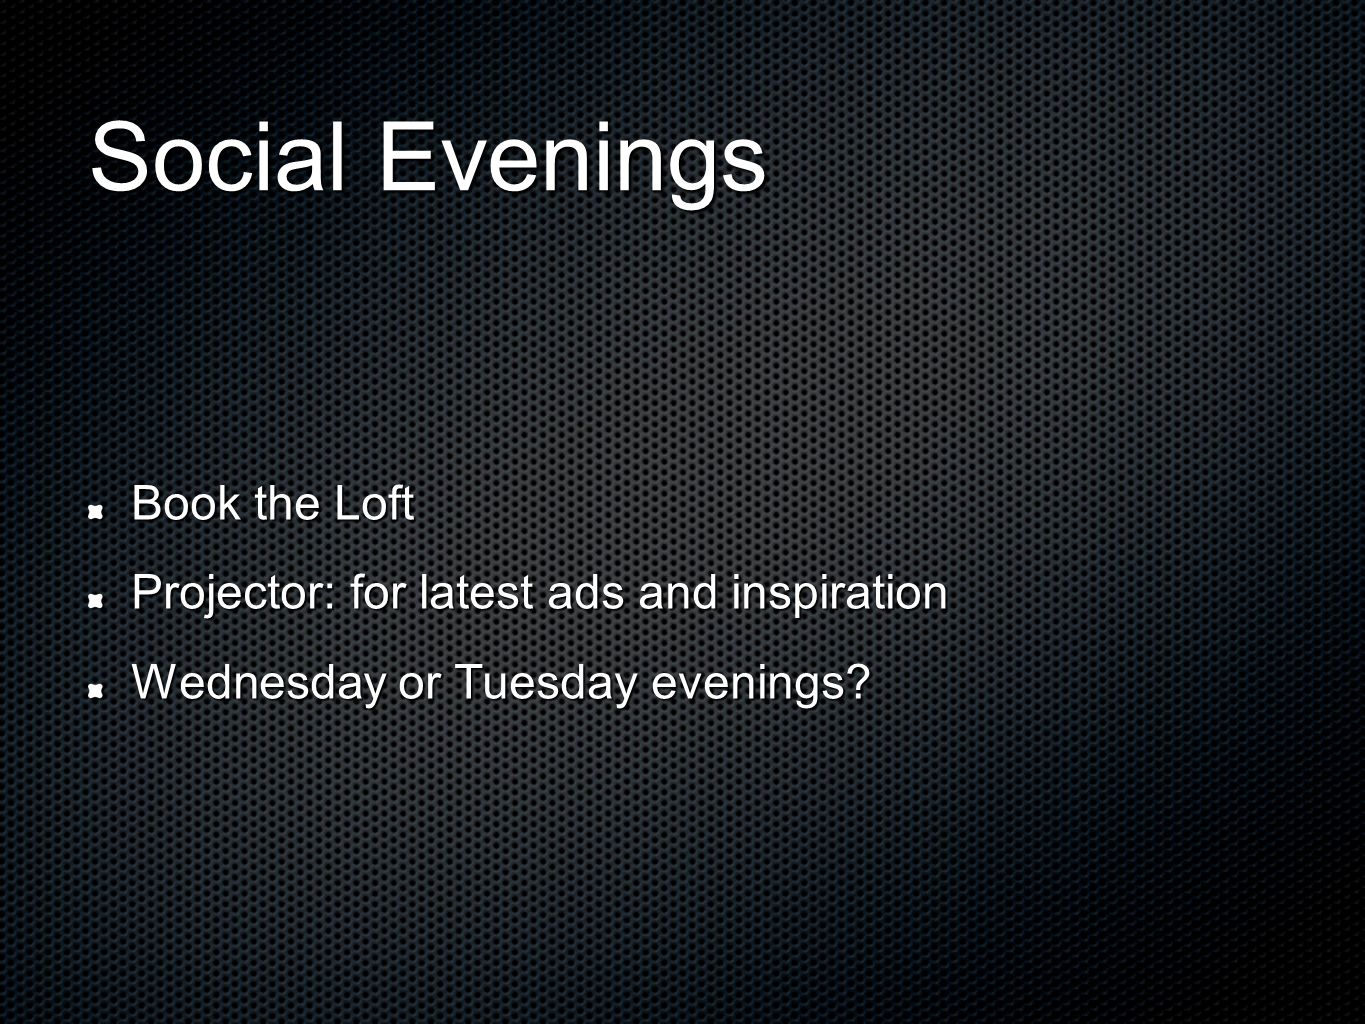 Social Evenings Book the Loft Projector: for latest ads and inspiration Wednesday or Tuesday evenings